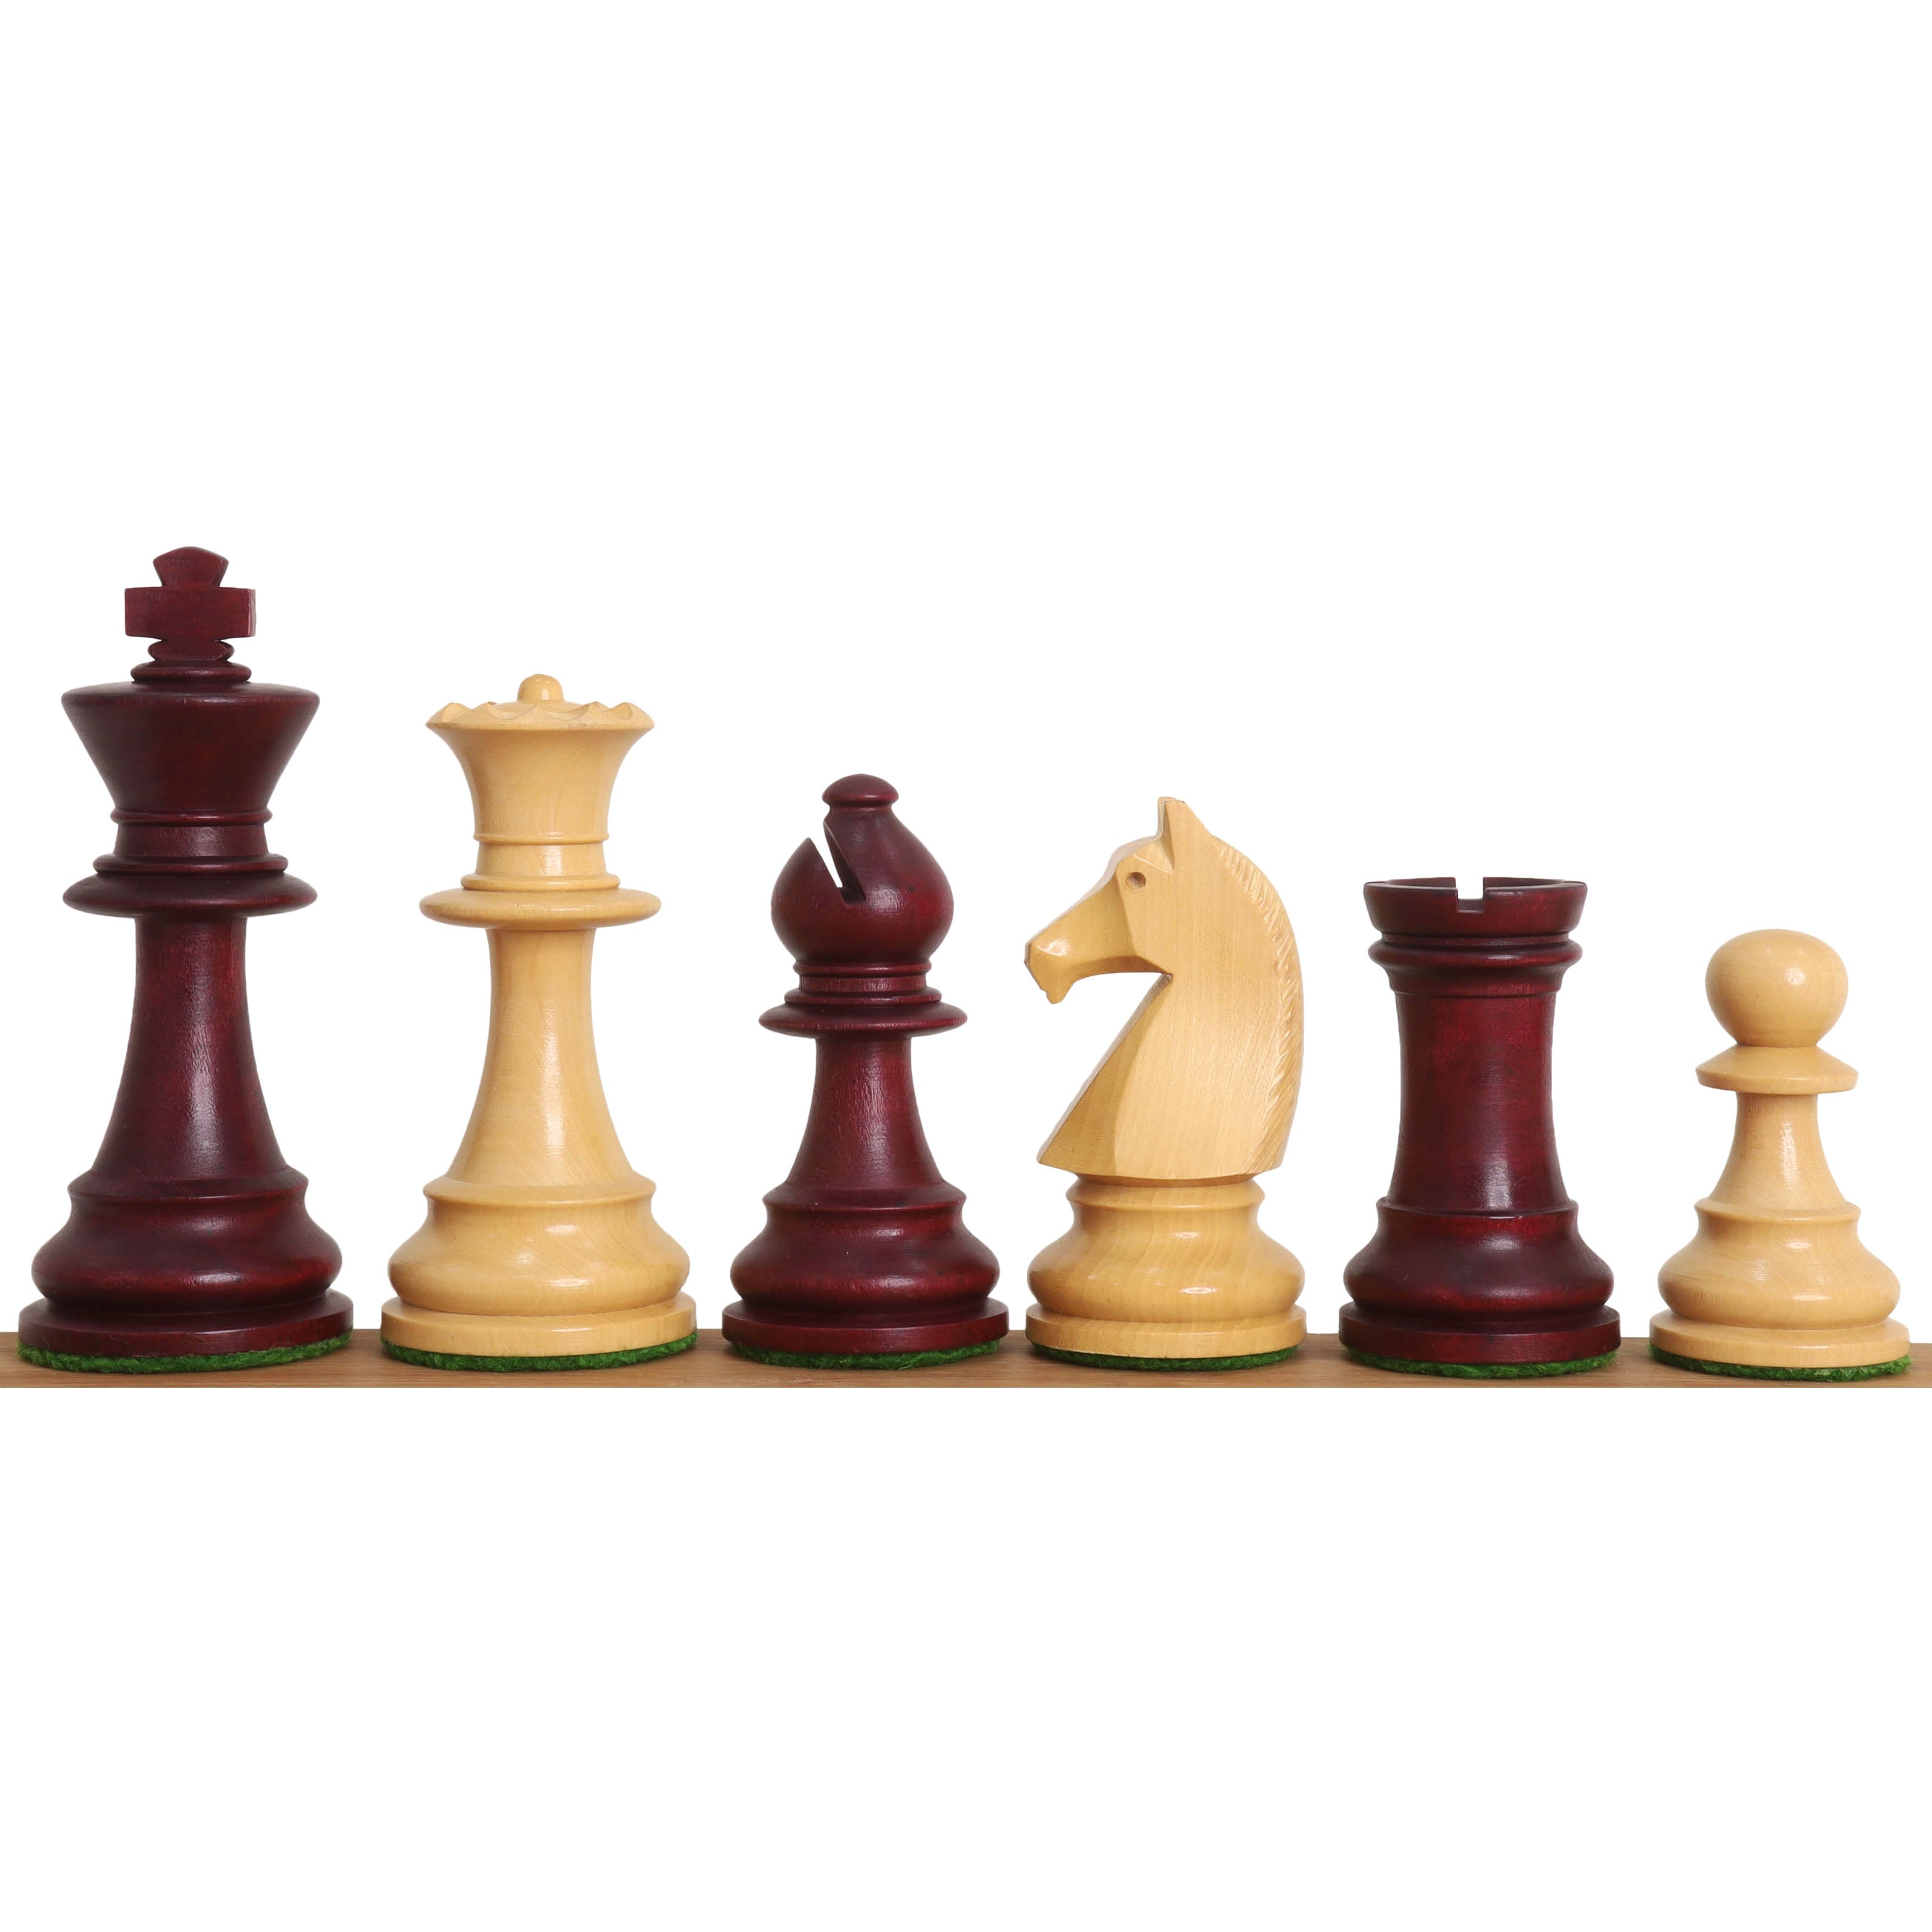 3.9" French Chavet Tournament Chess Set- Chess Pieces Only - Mahogany Stained & Boxwood